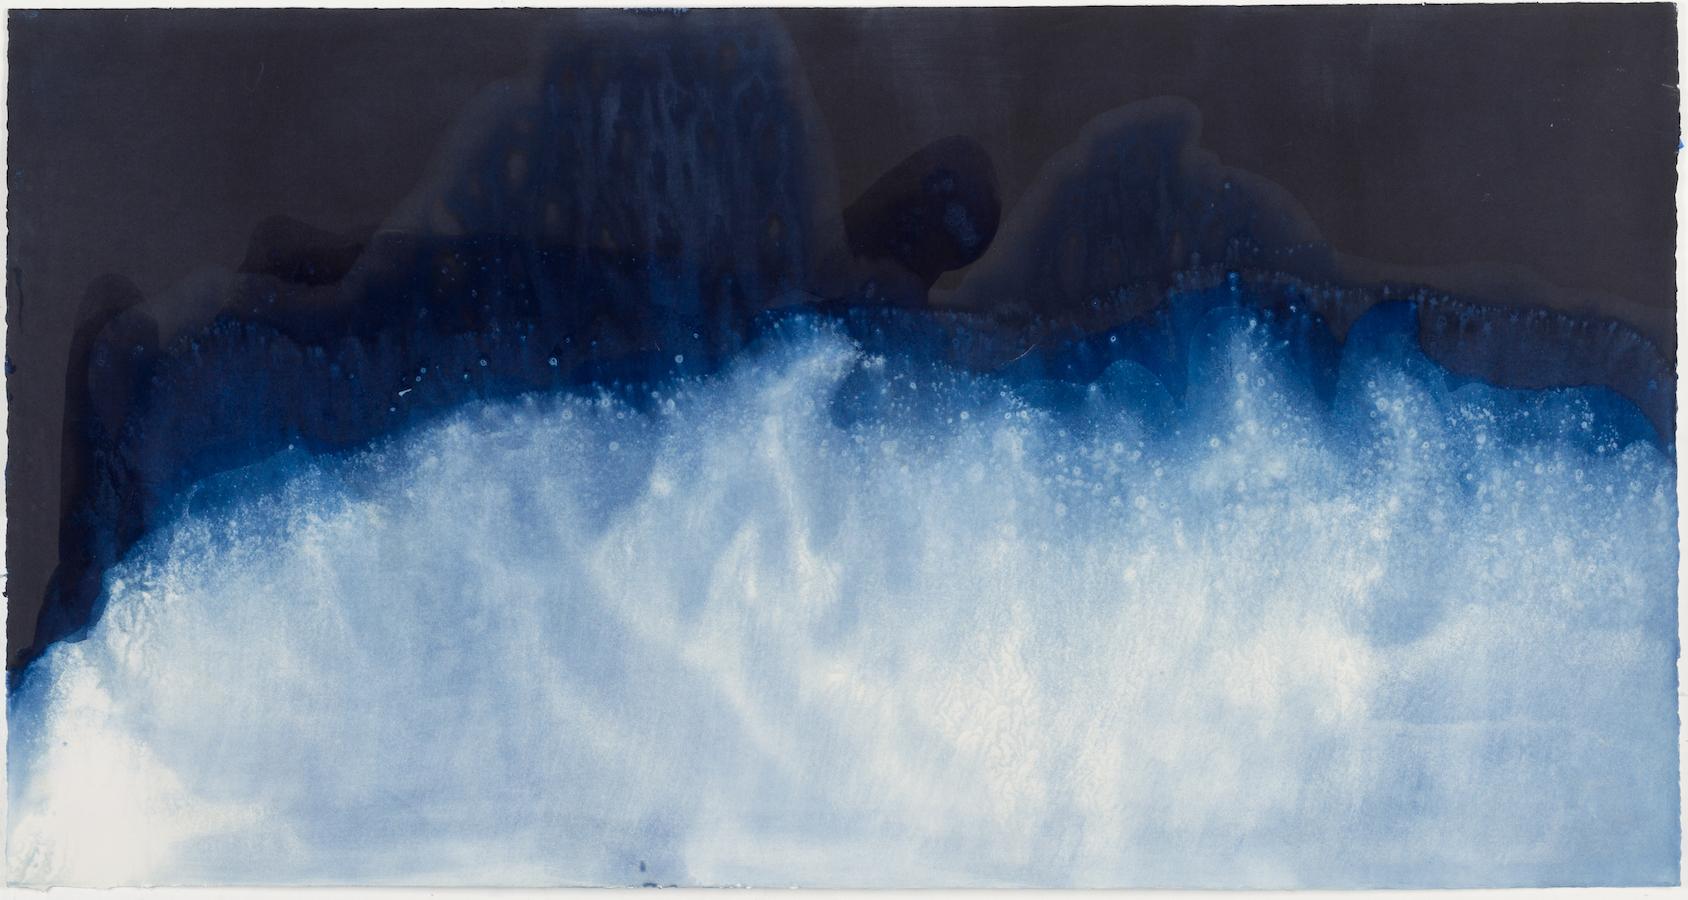 28° 14' 22.942'' N, 114° 6' 4.129'' W-6. Cyanotype photograph of the ocean waves - Photograph by Paola Davila